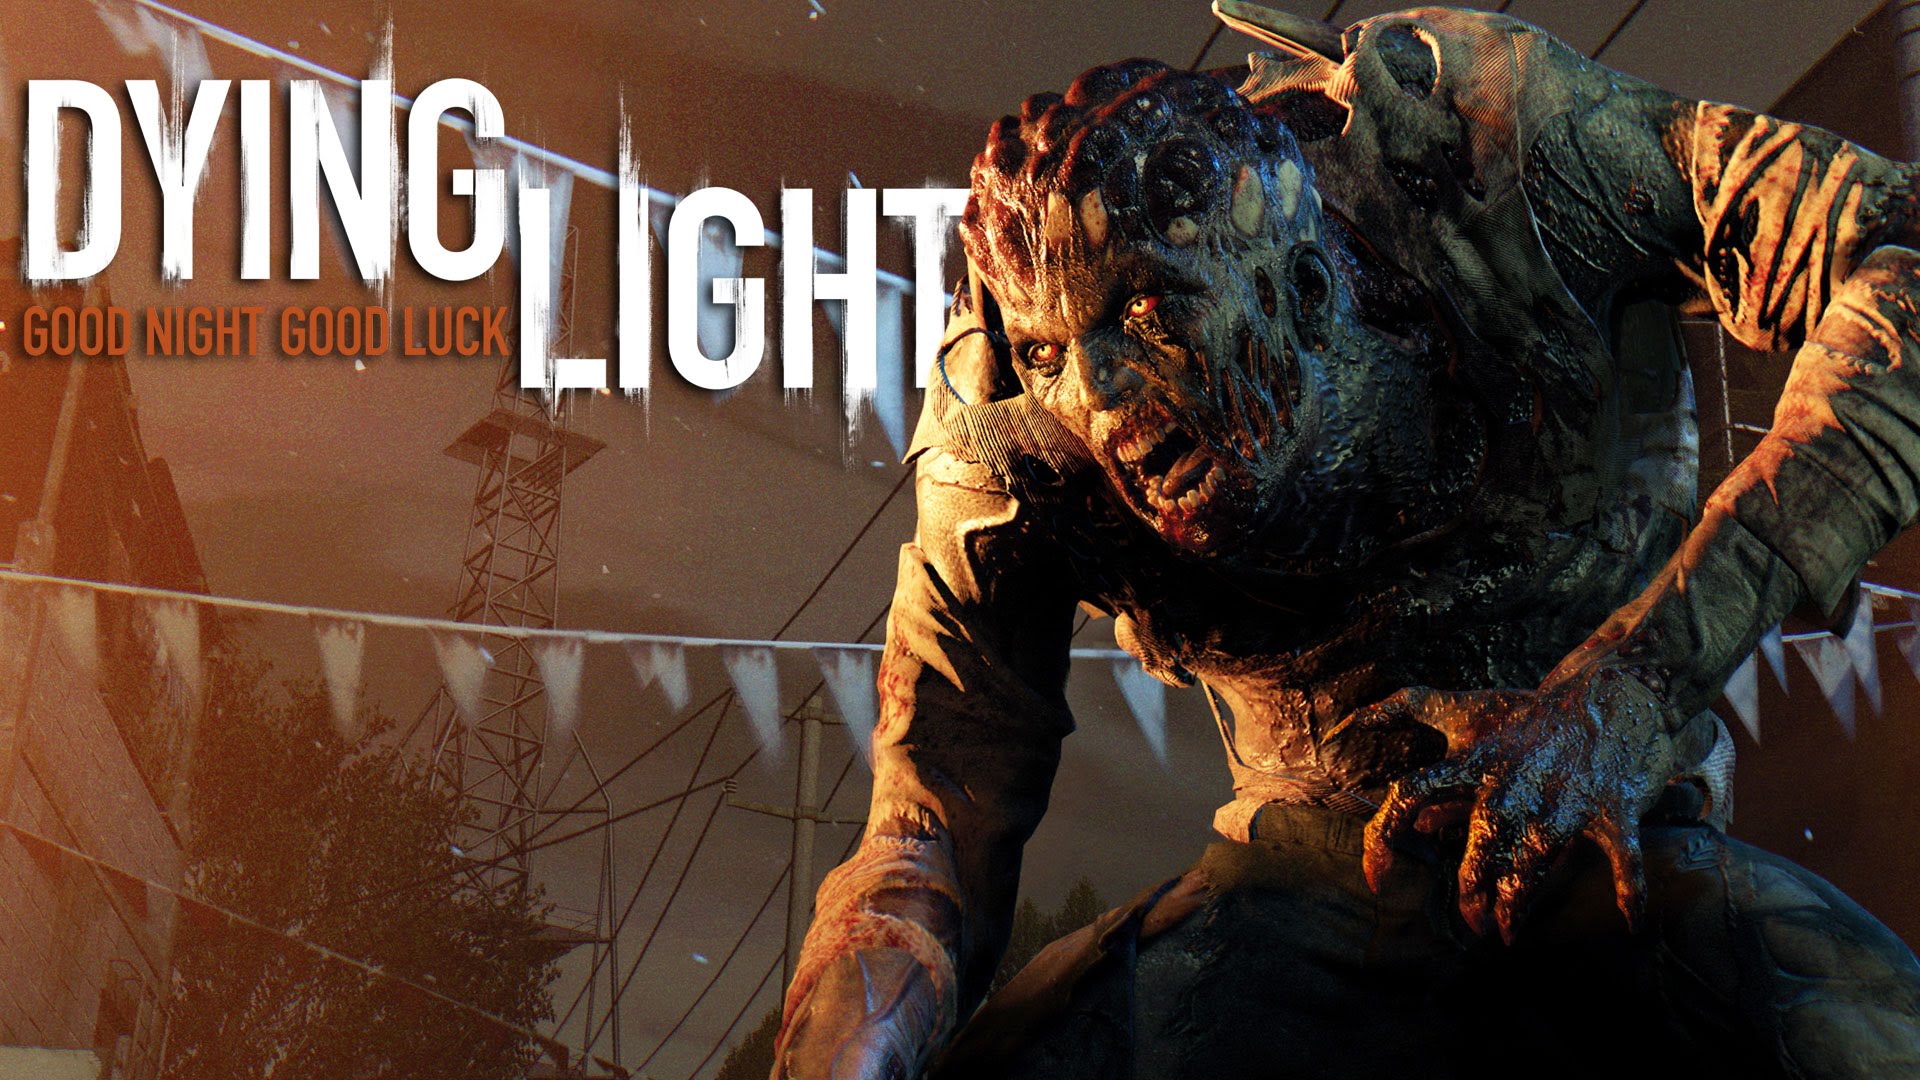 TGDB - Browse - Game - Dying Light: Definitive Edition